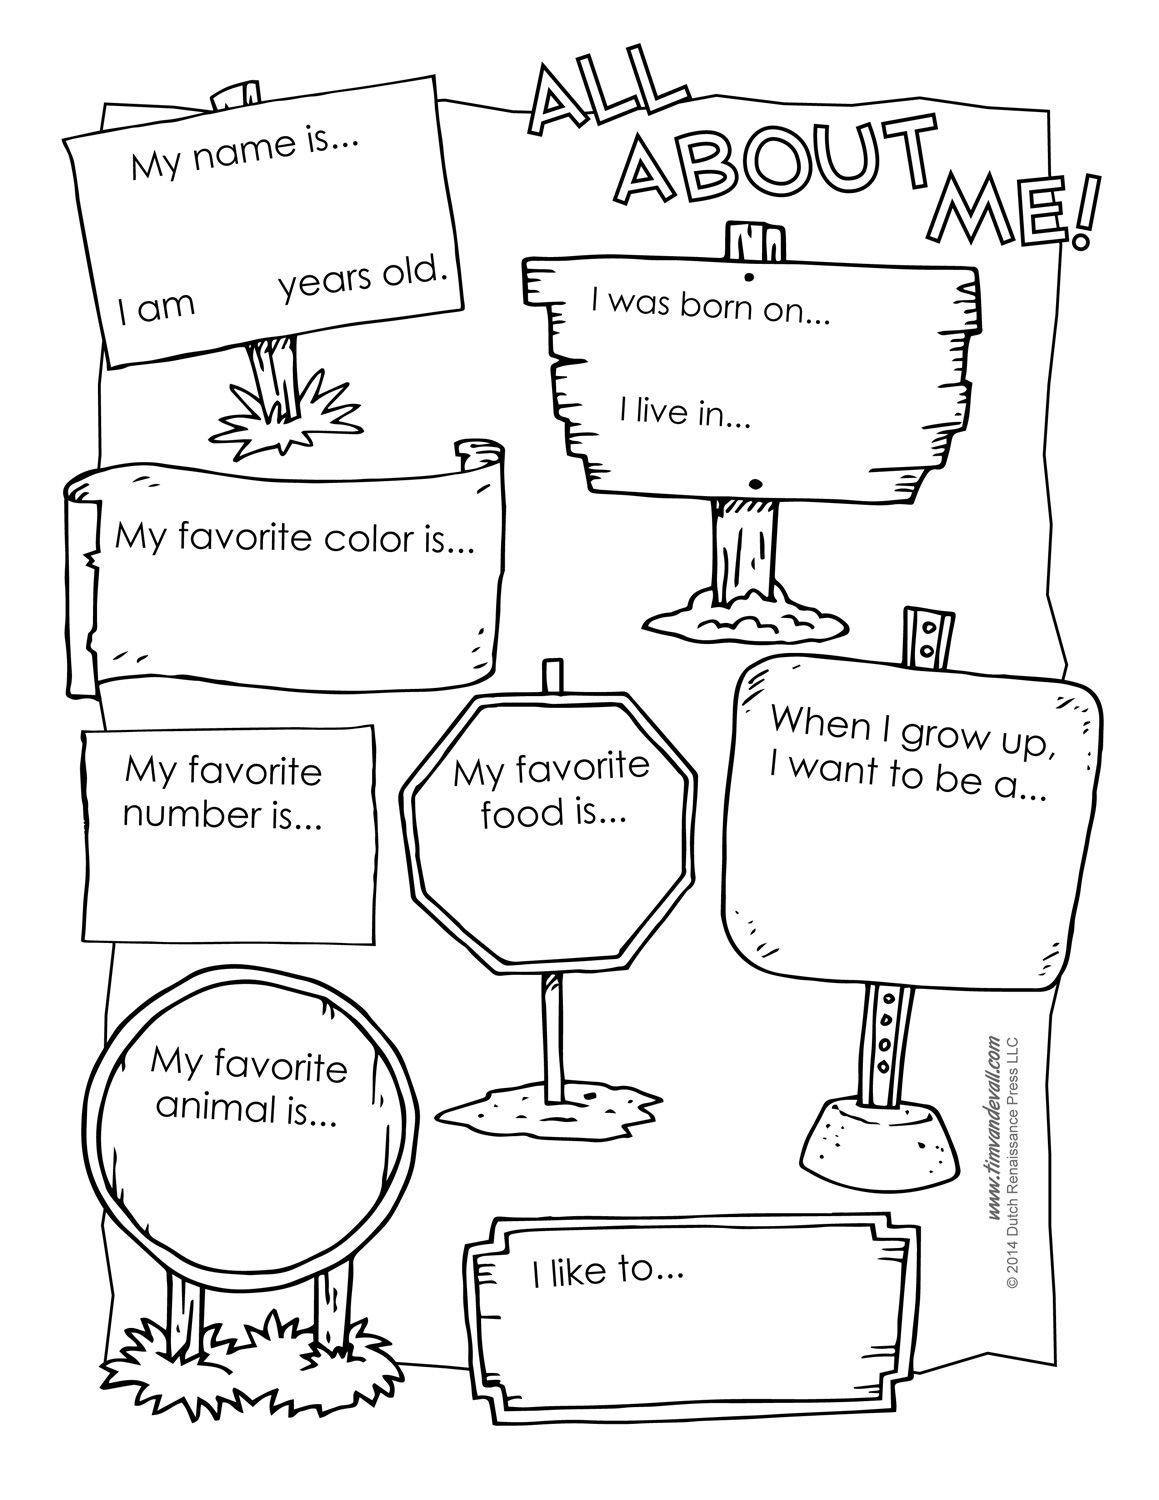 All About Me Preschool Template | 6 Best Images Of All About